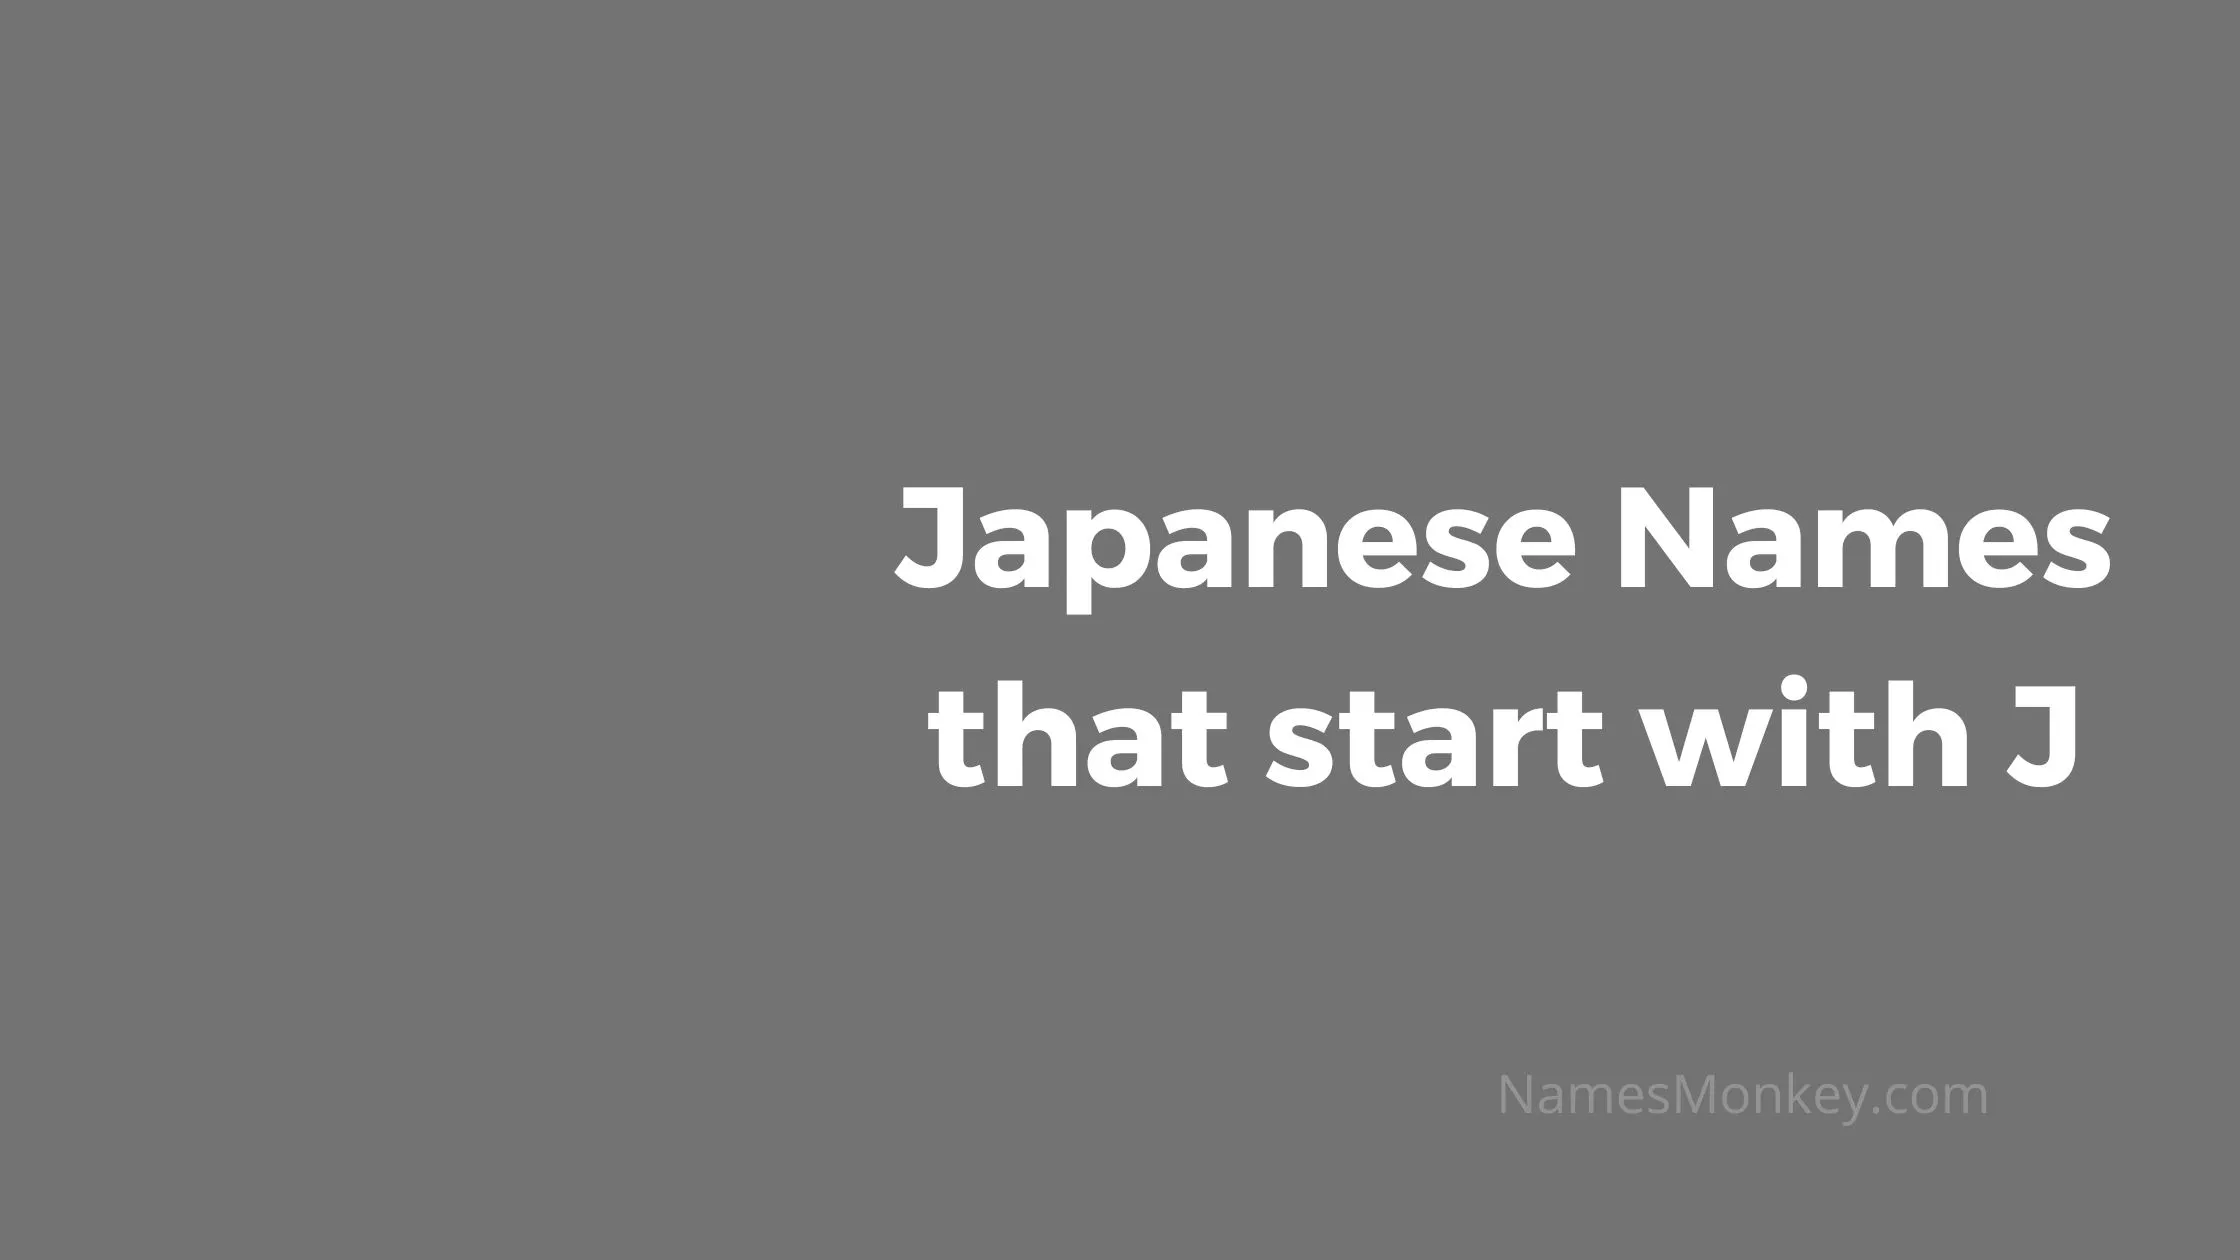 Japanese Names that start with J